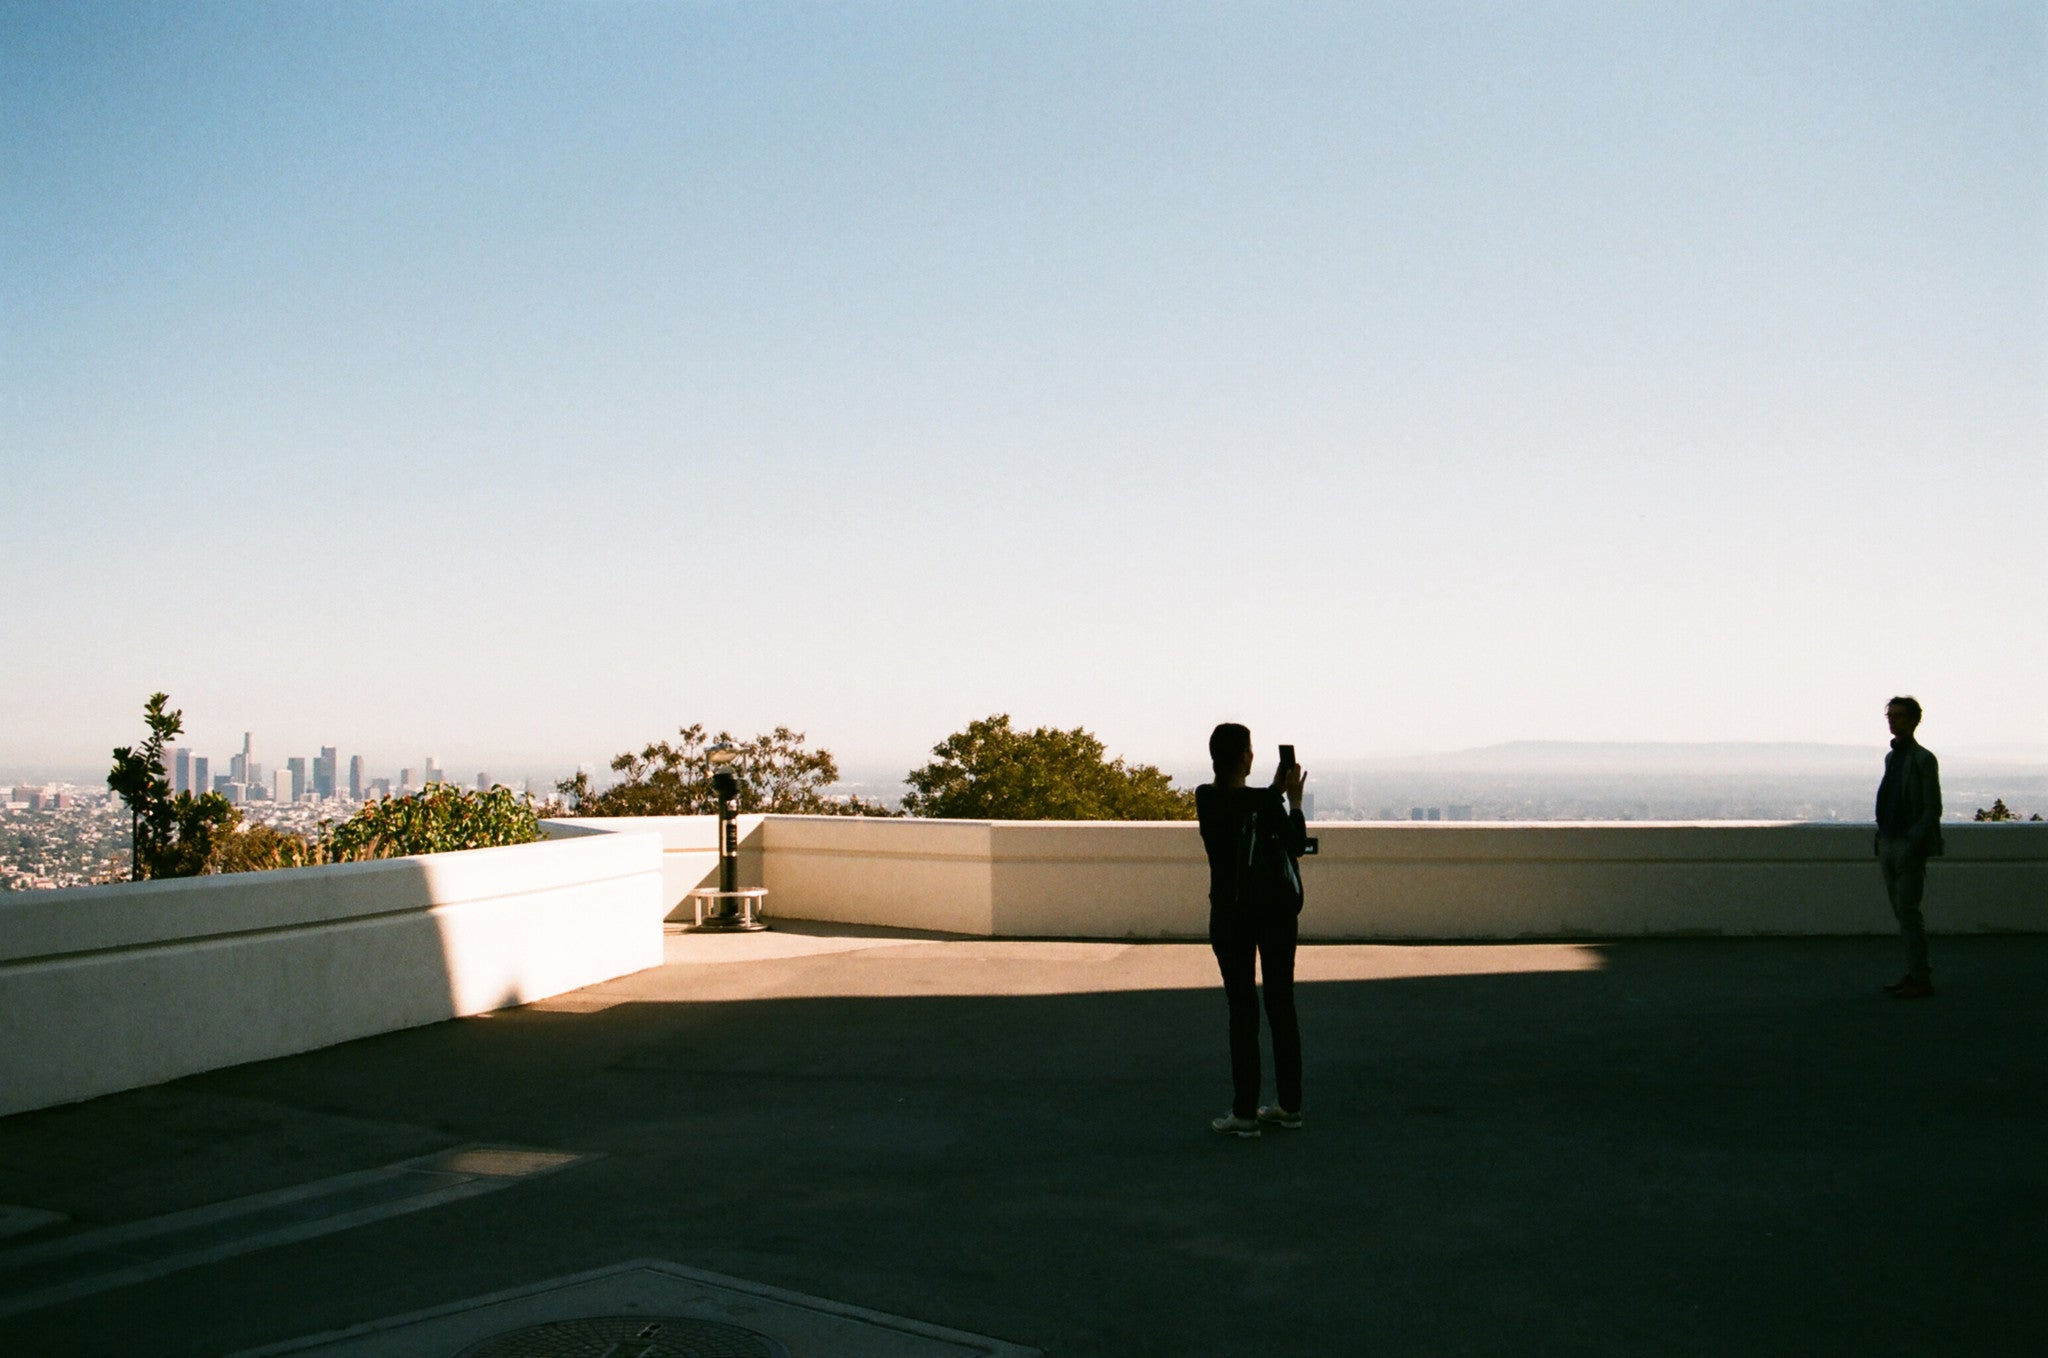 Andrew Gori + Ambre Kelly, "Couple-Griffith Observatory, Los Angeles"